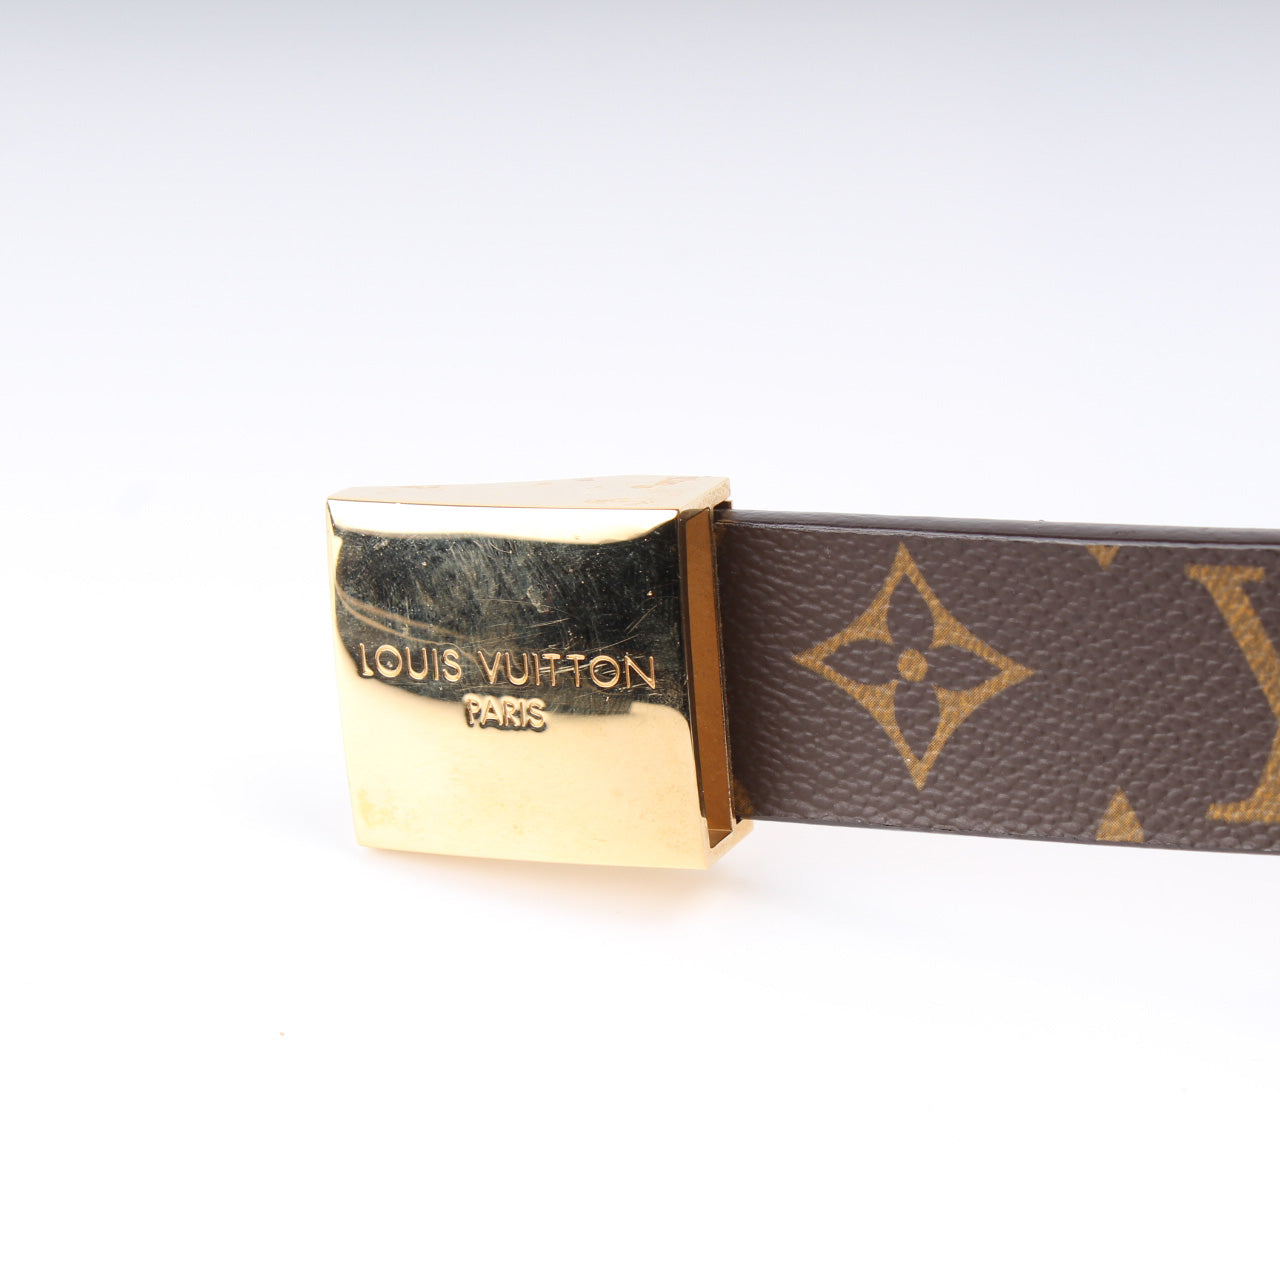 Louis Vuitton Monogram Square Buckle Belt with Gold Hardware- Size